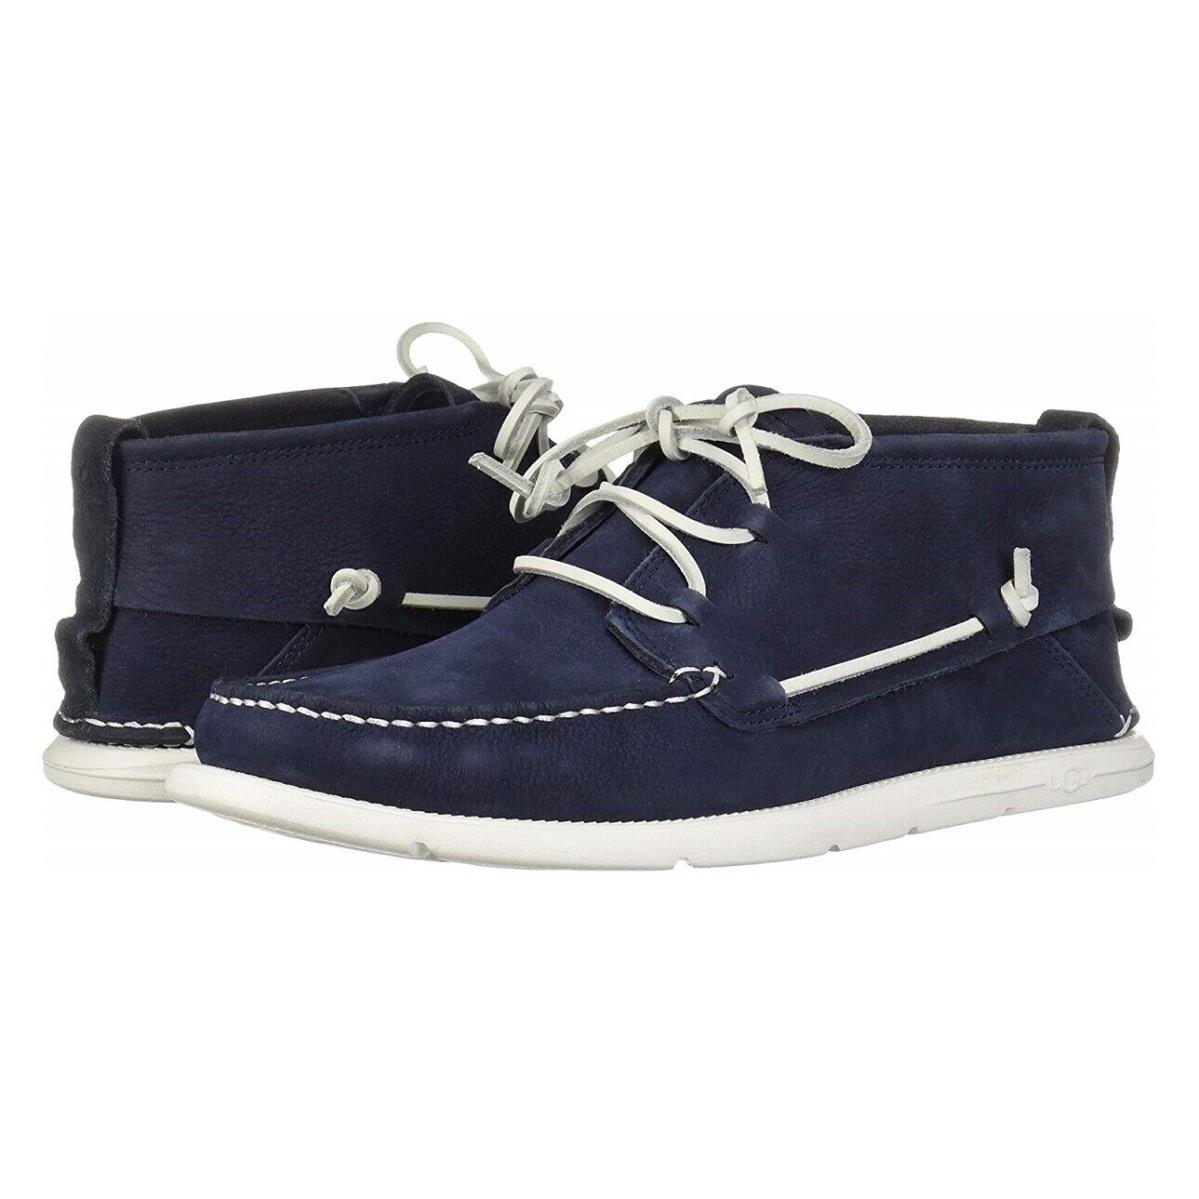 Ugg Beach Moc Chukka Boot Leather Men`s Ankle Shoes True Navy Sizes 10 11.5 - True Navy